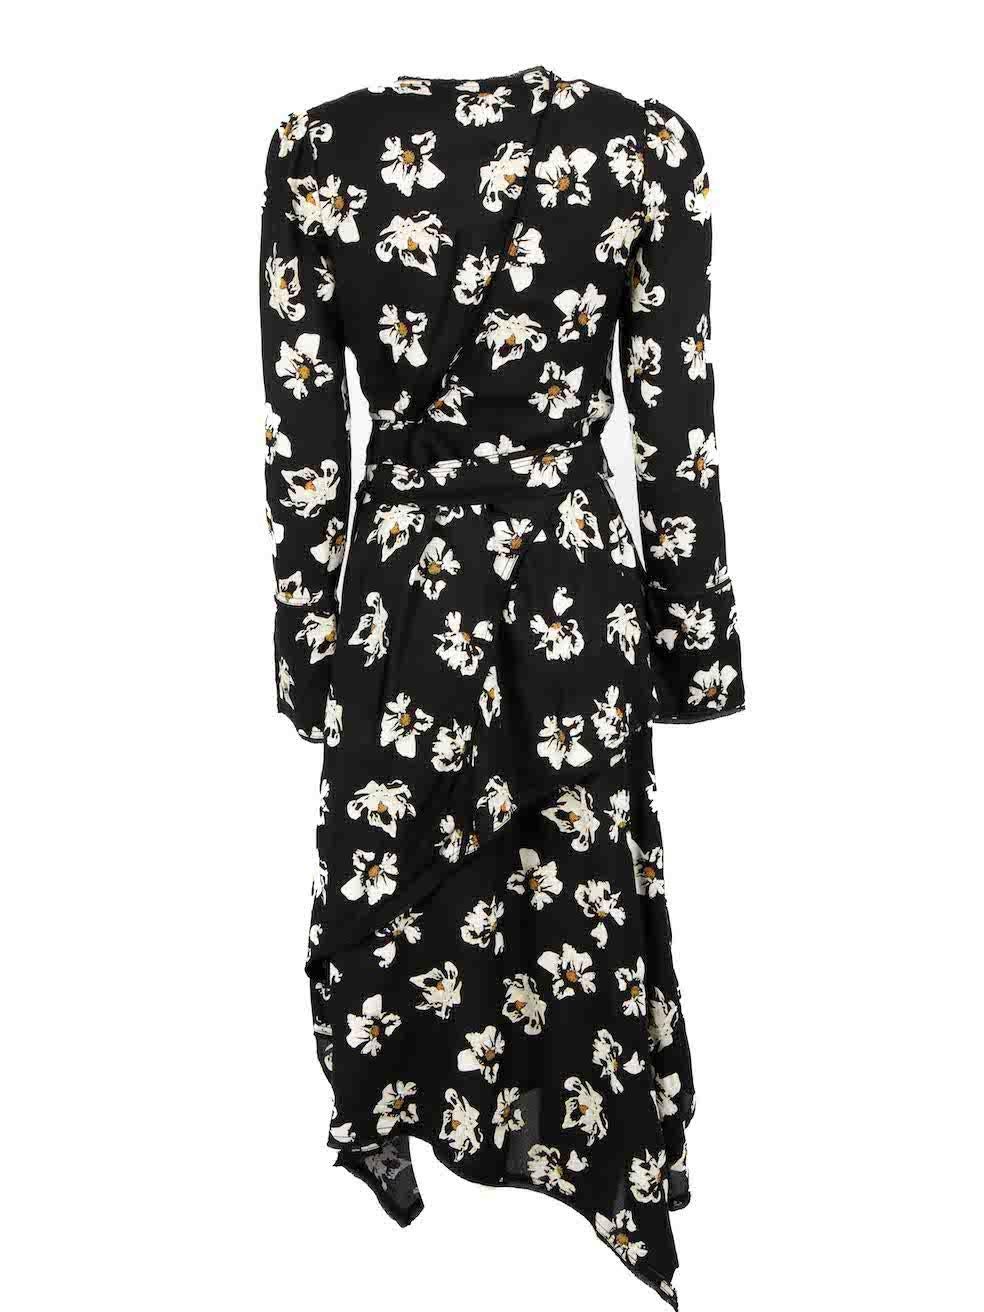 Proenza Schouler Black Floral Belted Midi Dress Size S In Excellent Condition For Sale In London, GB